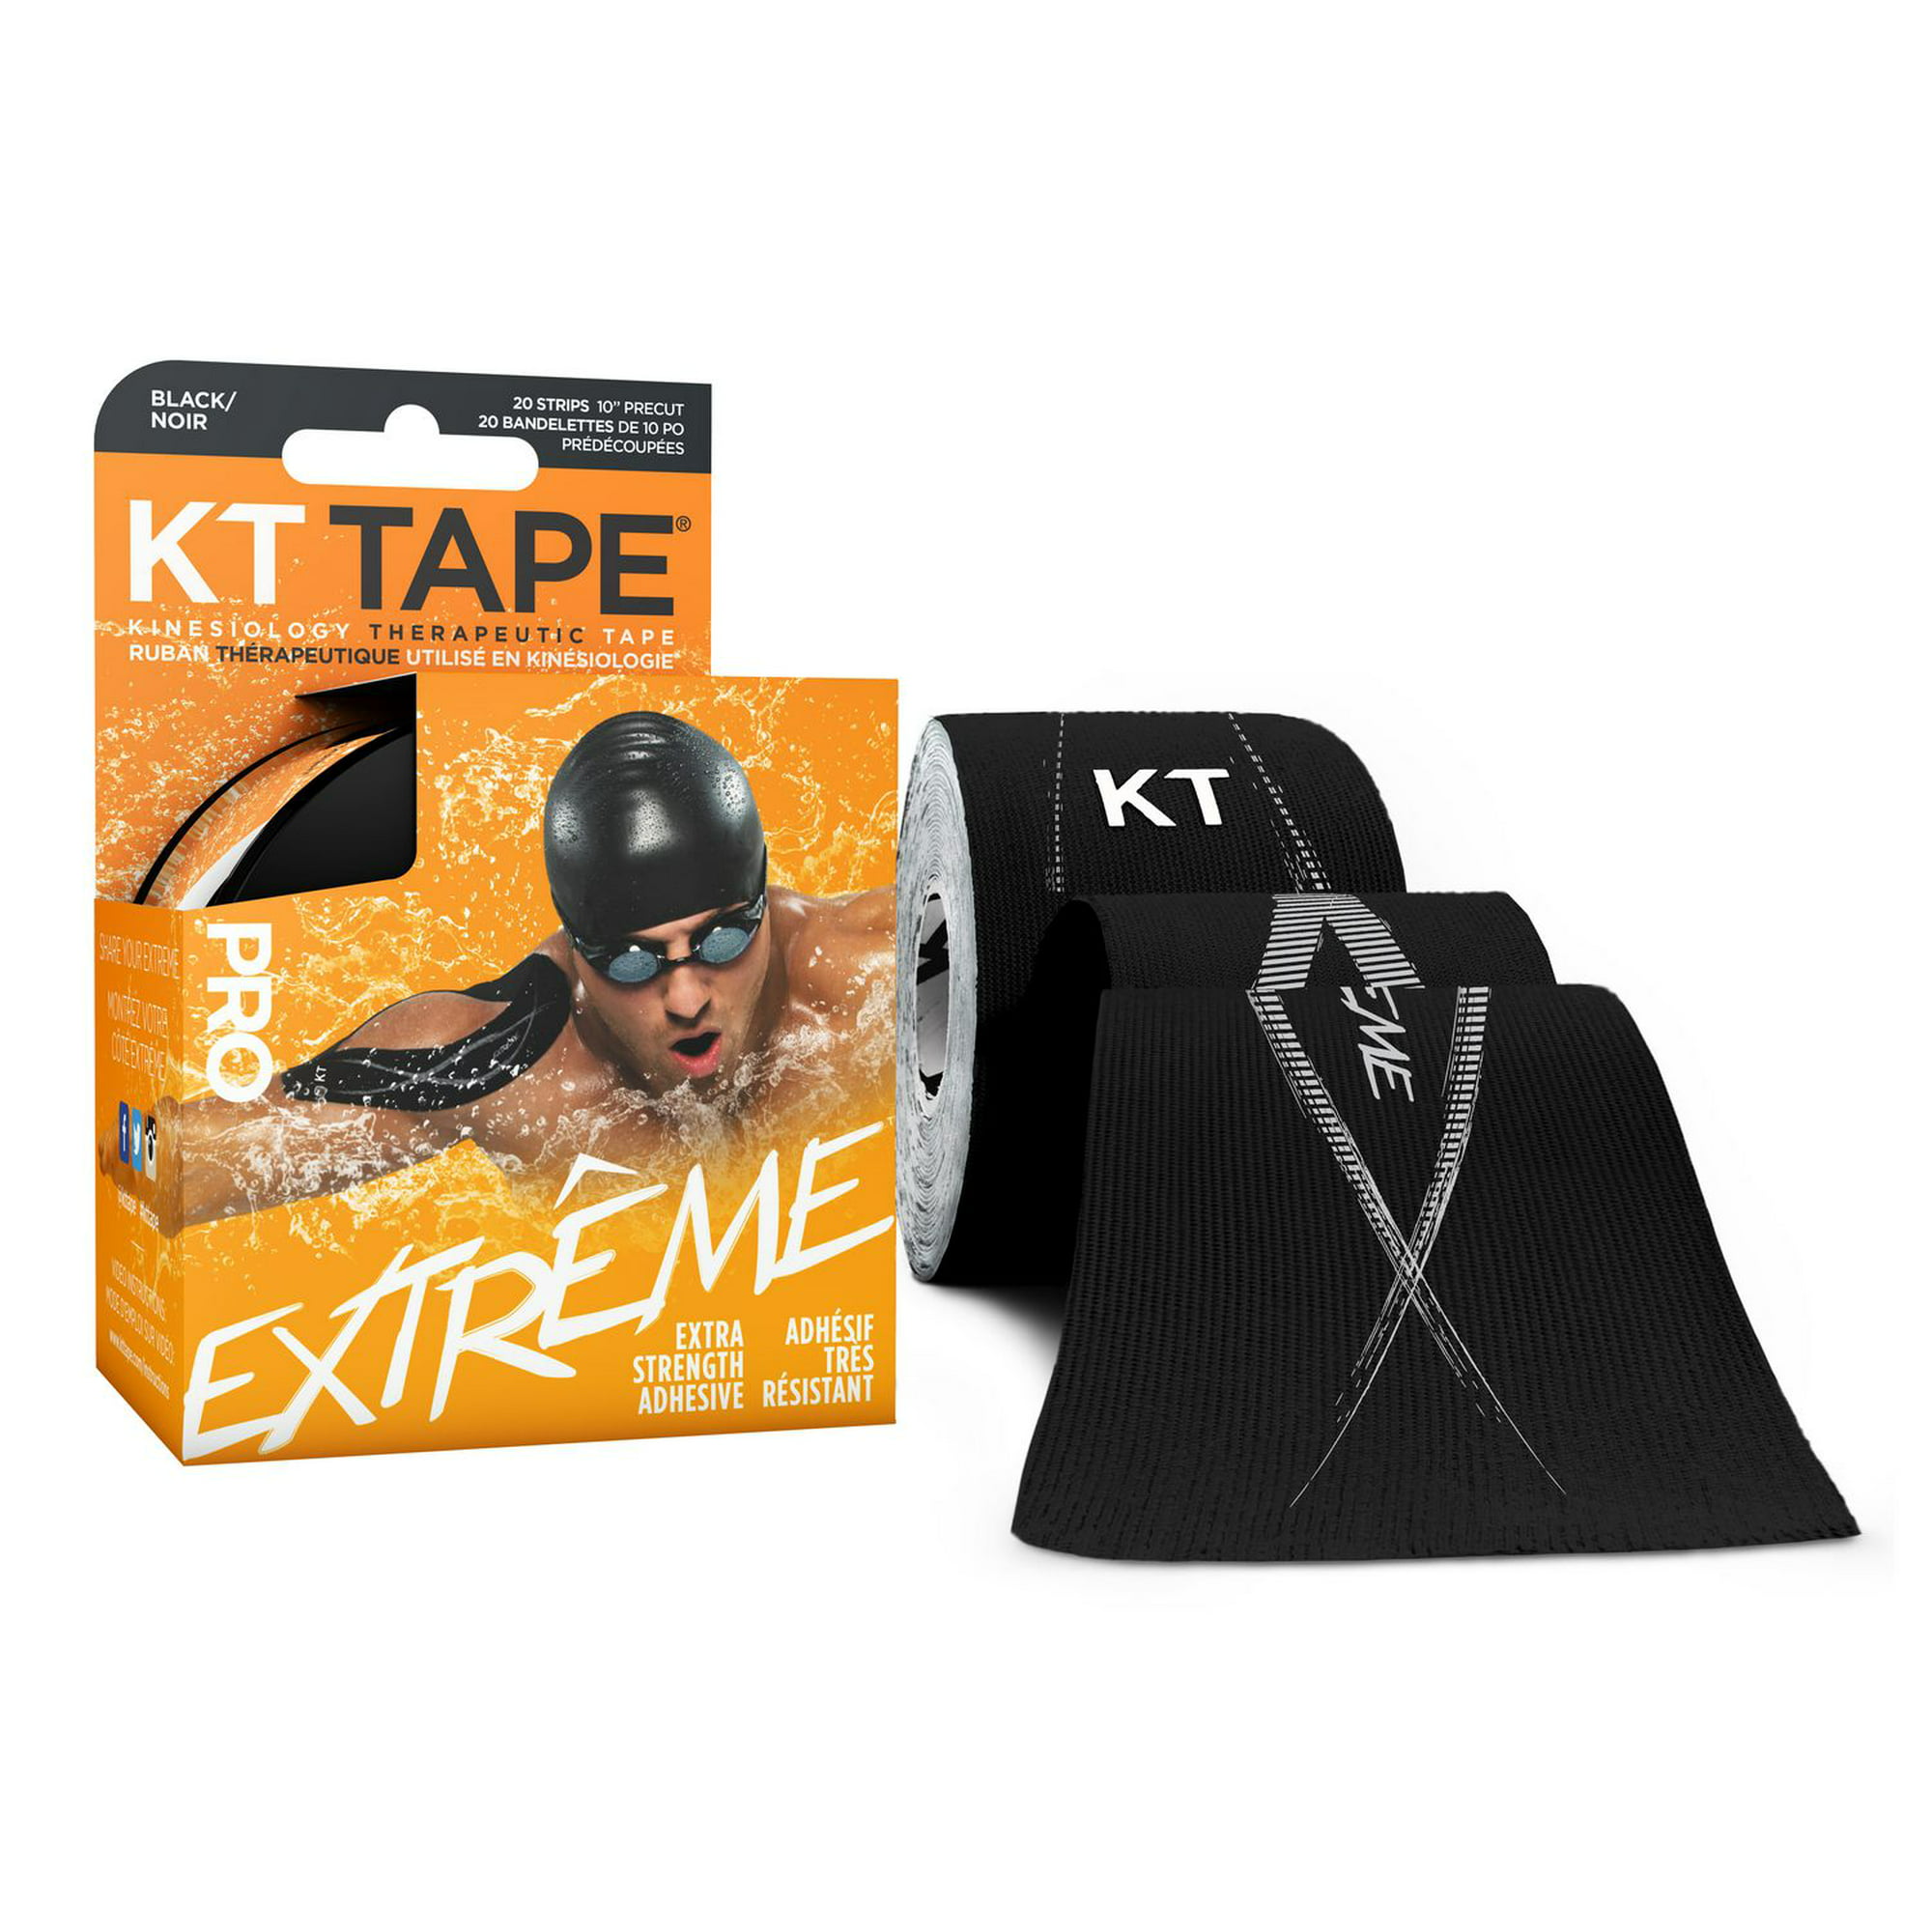 KT TAPE Pro Extreme Therapeutic Kinesiology Sports Tape, 20 Strips 